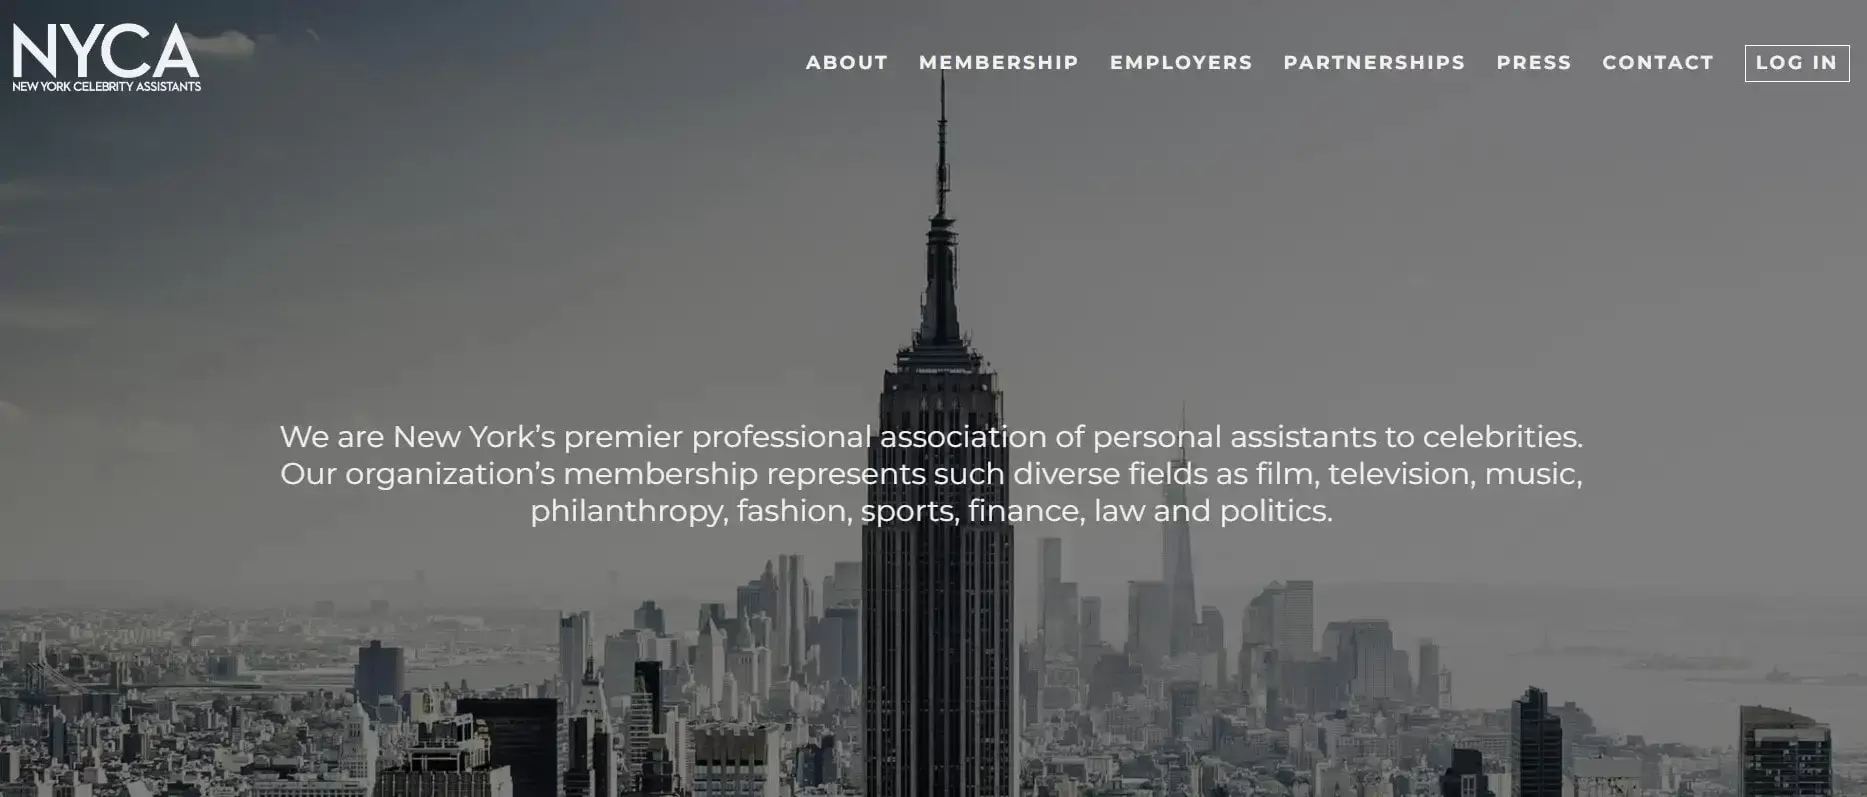 join an association for celebrity assistants